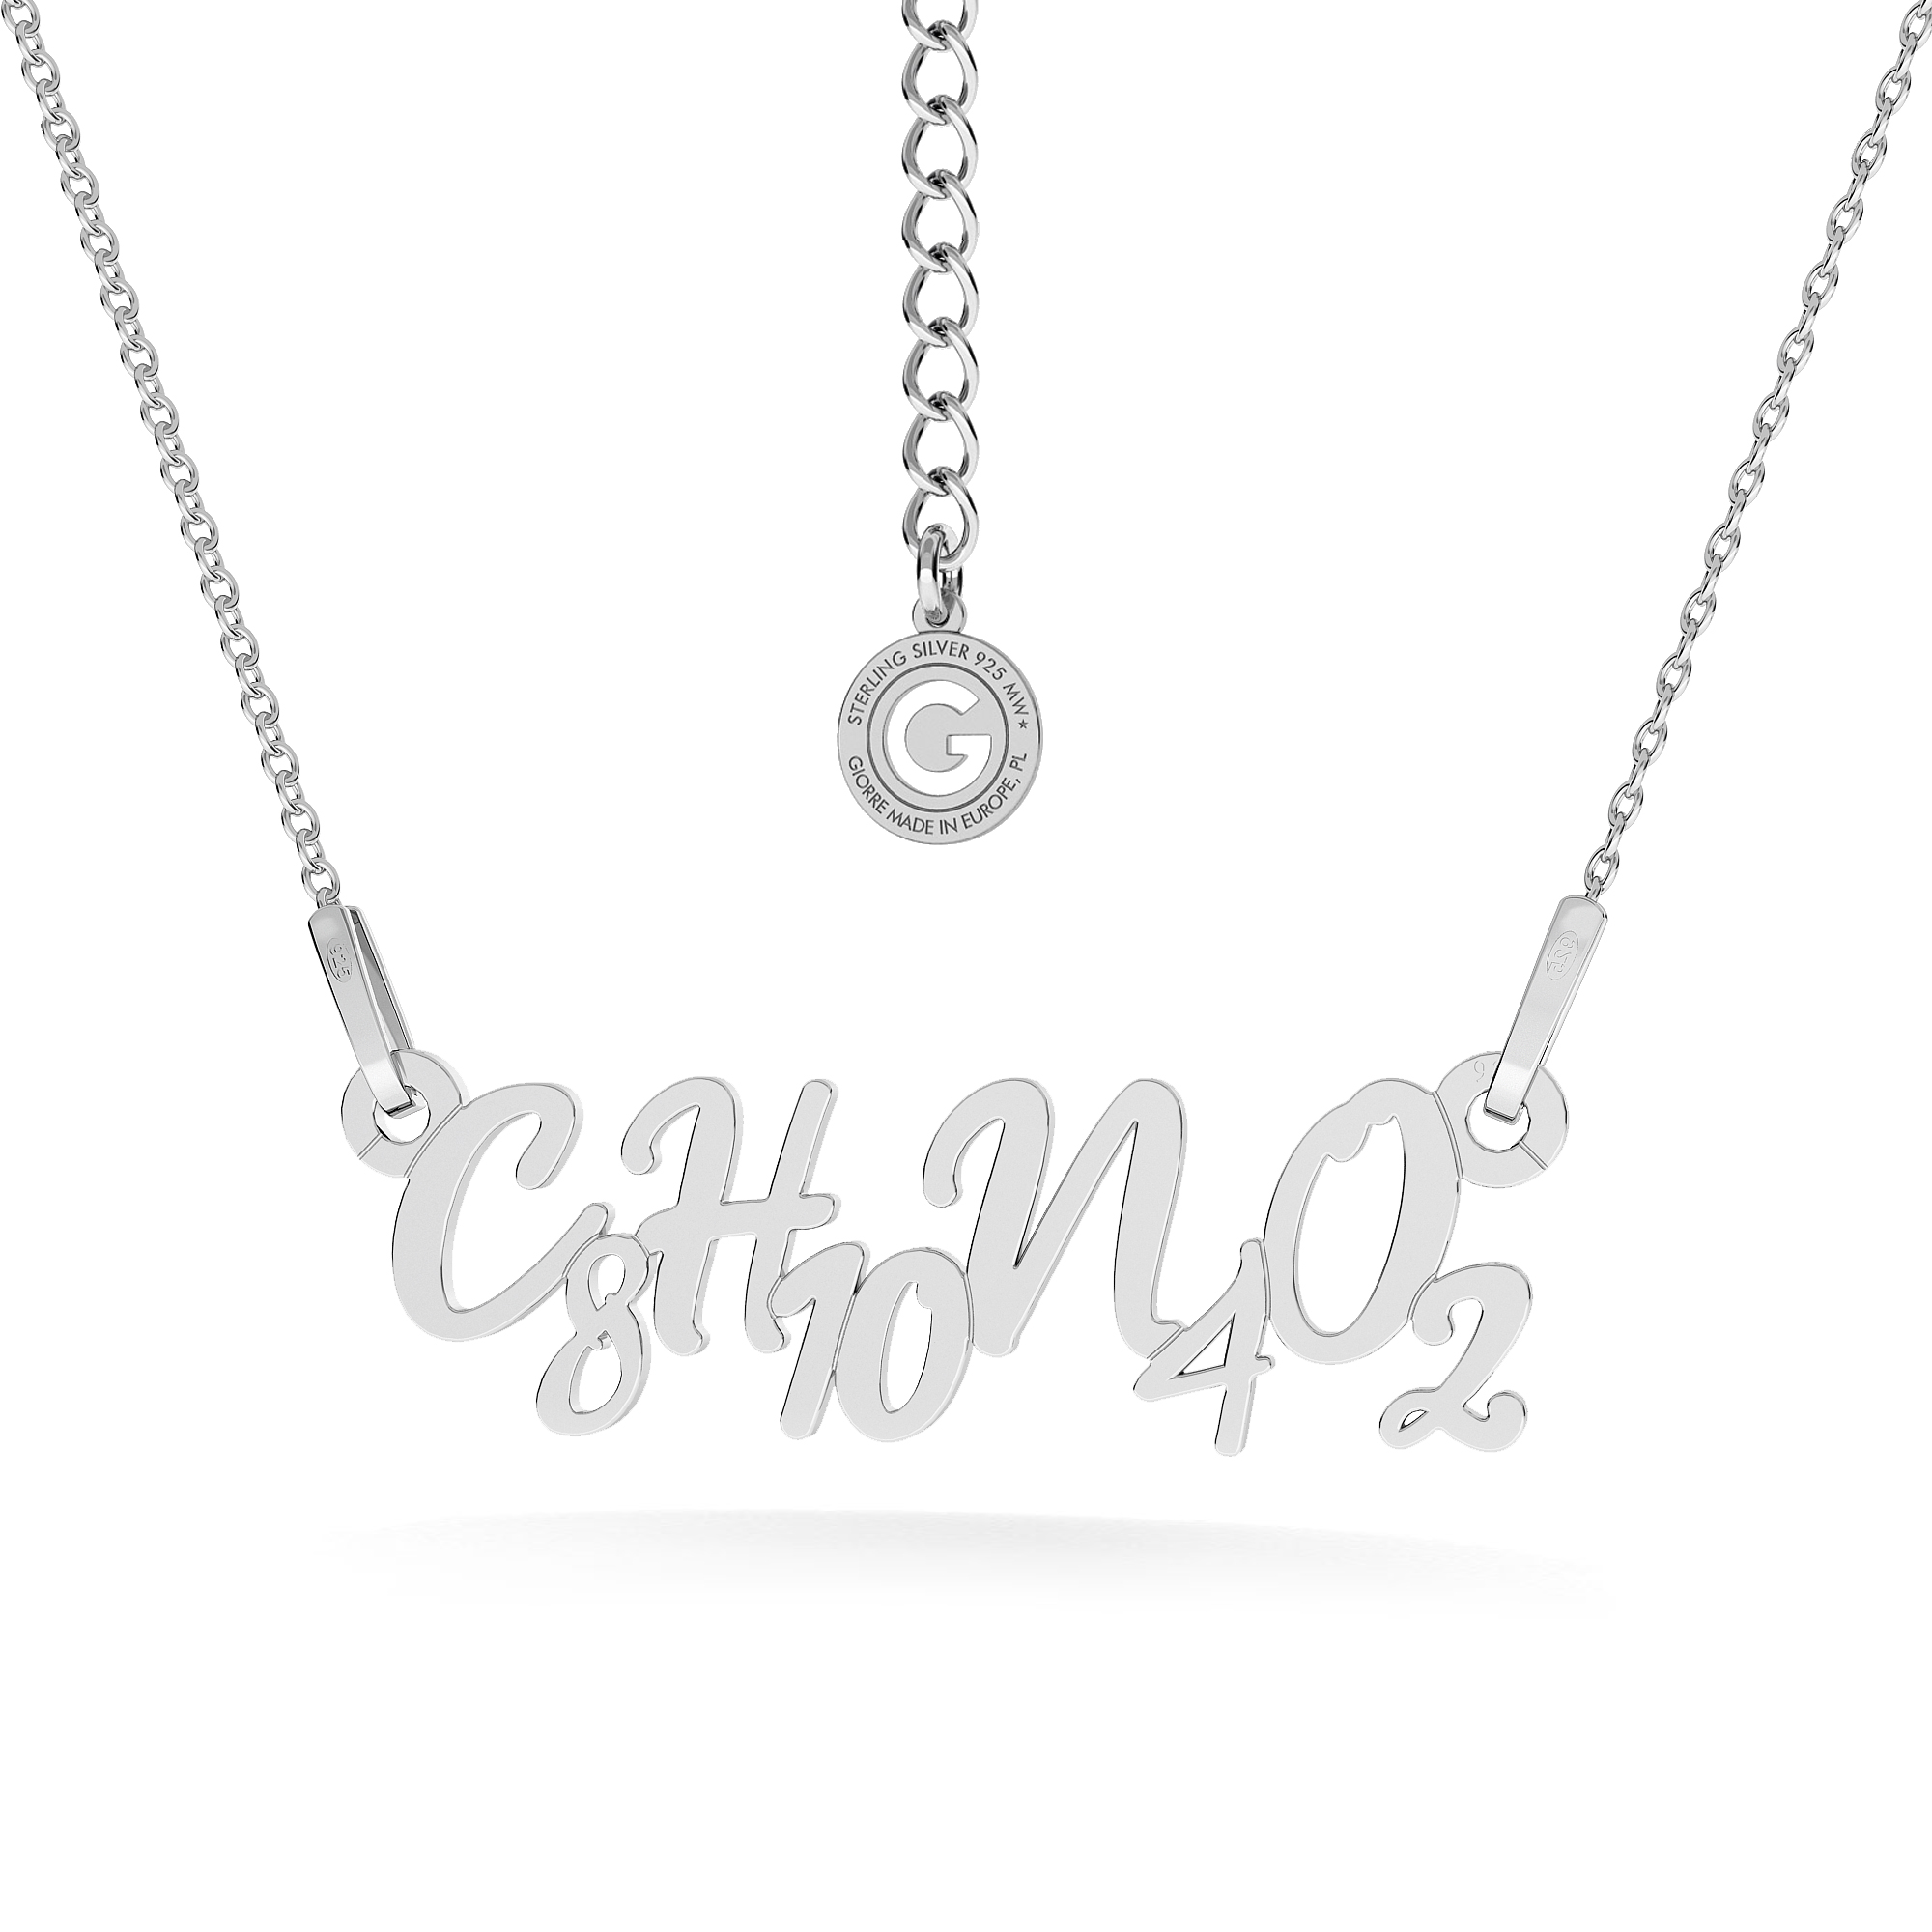 Caffeine necklace chemical formula sterling silver